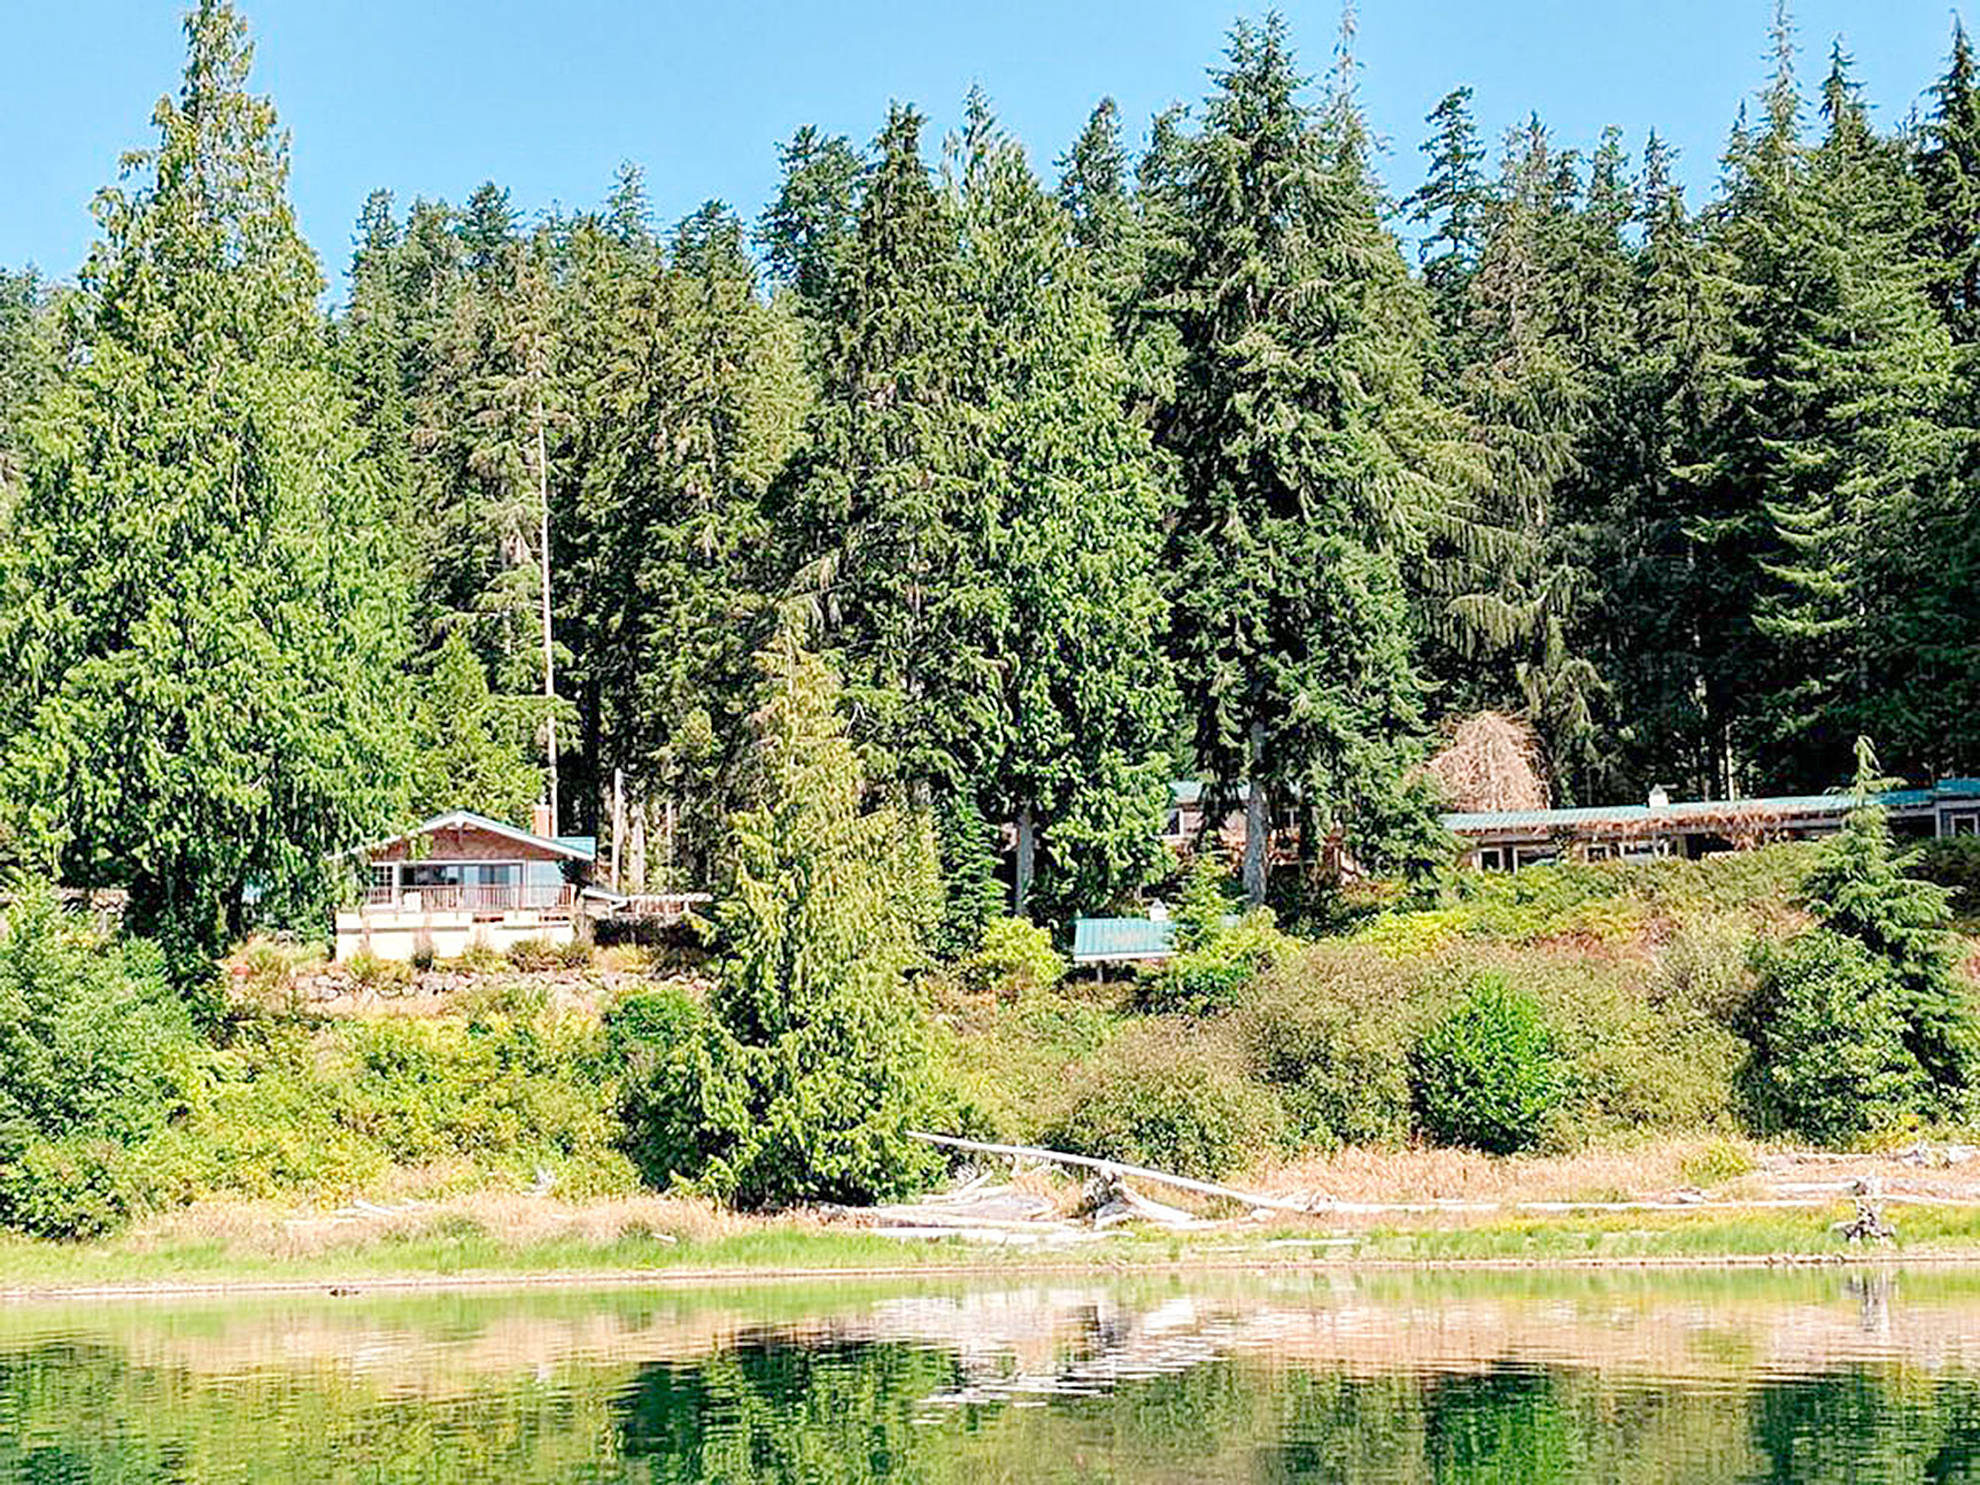 National Park in process of absorbing resort at Quinault